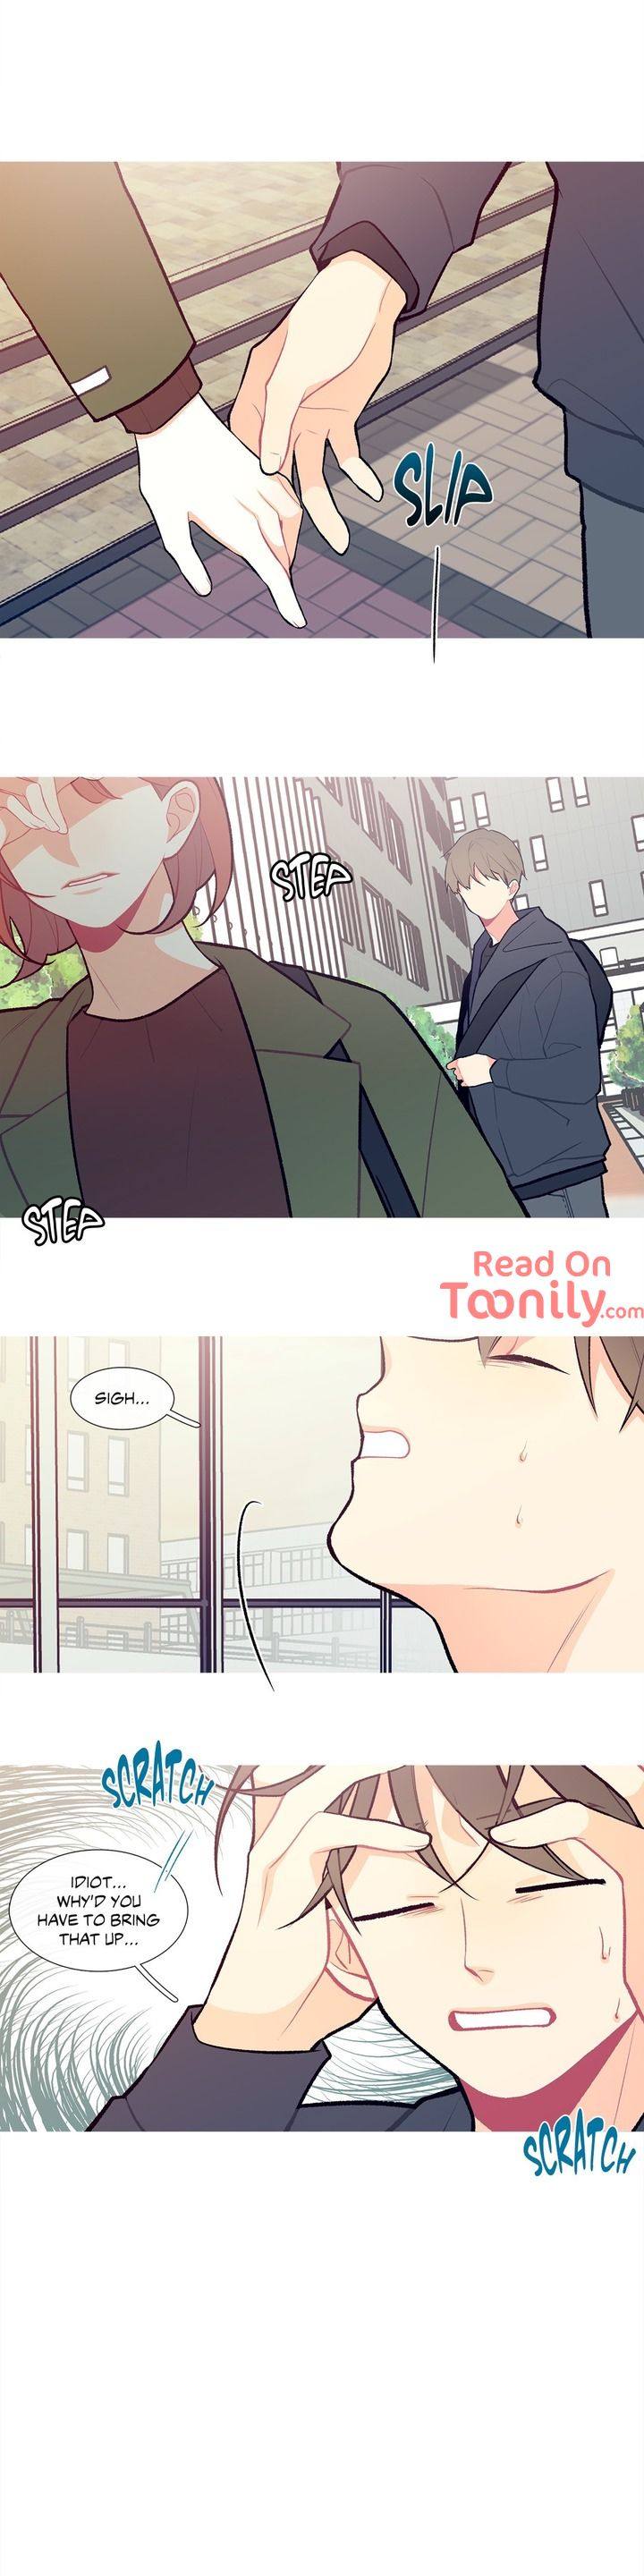 What’s Going On? - Chapter 8 Page 4